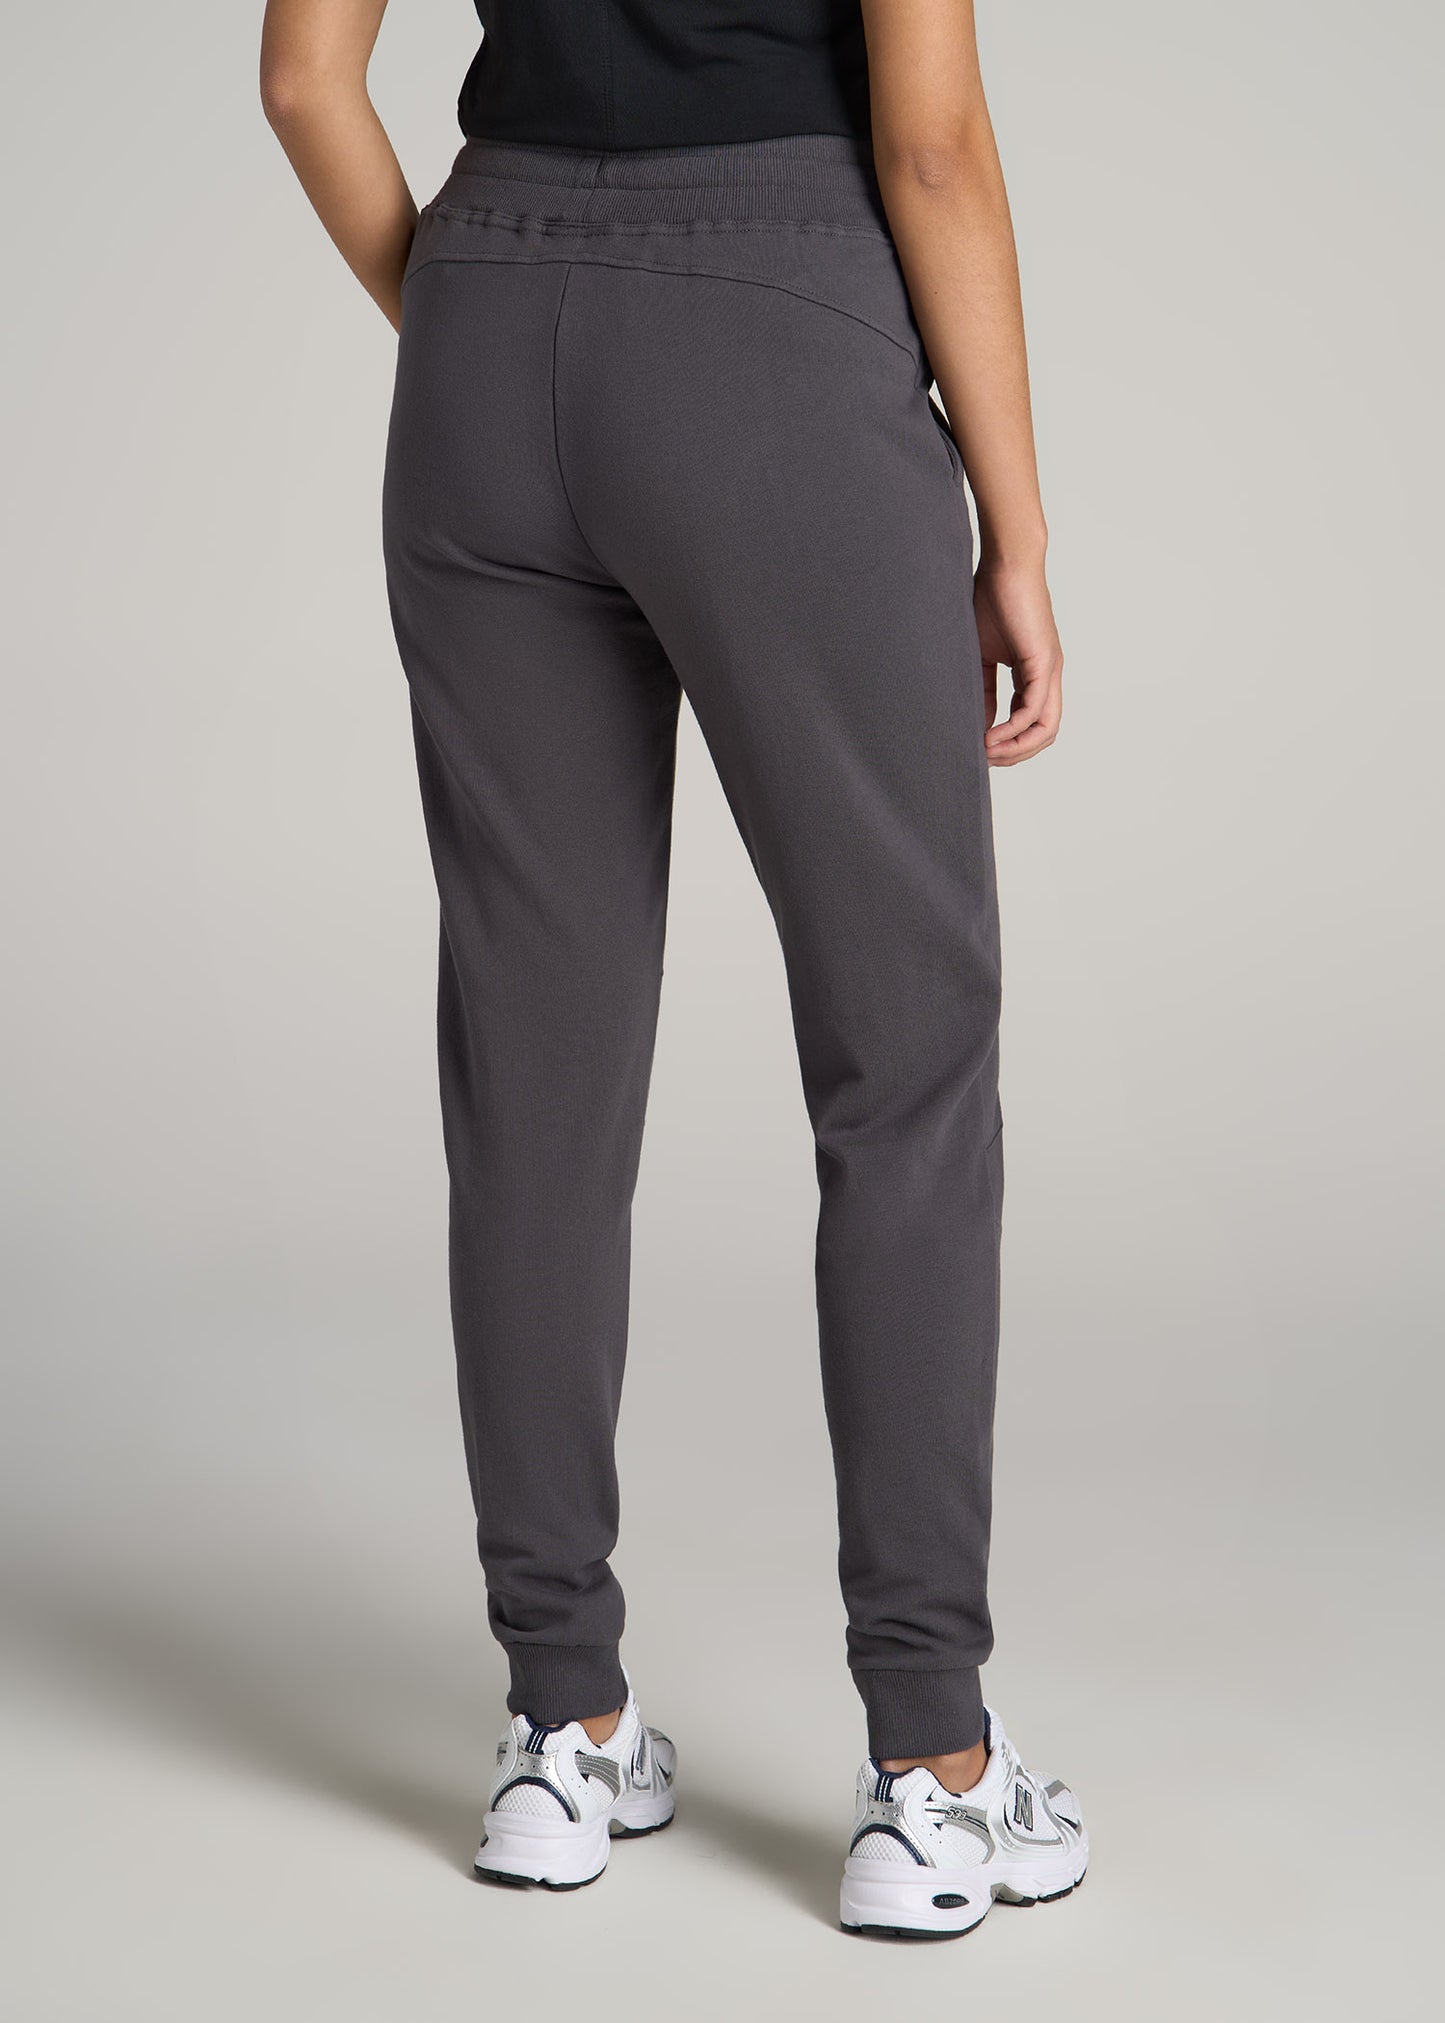 SAFORT 31 Inseam Tall Regular Women 100% Cotton Jogger Pants Casual  Sweatpants Tracksuit Bottoms with 3 Pockets, Charcoal Grey S :  : Fashion